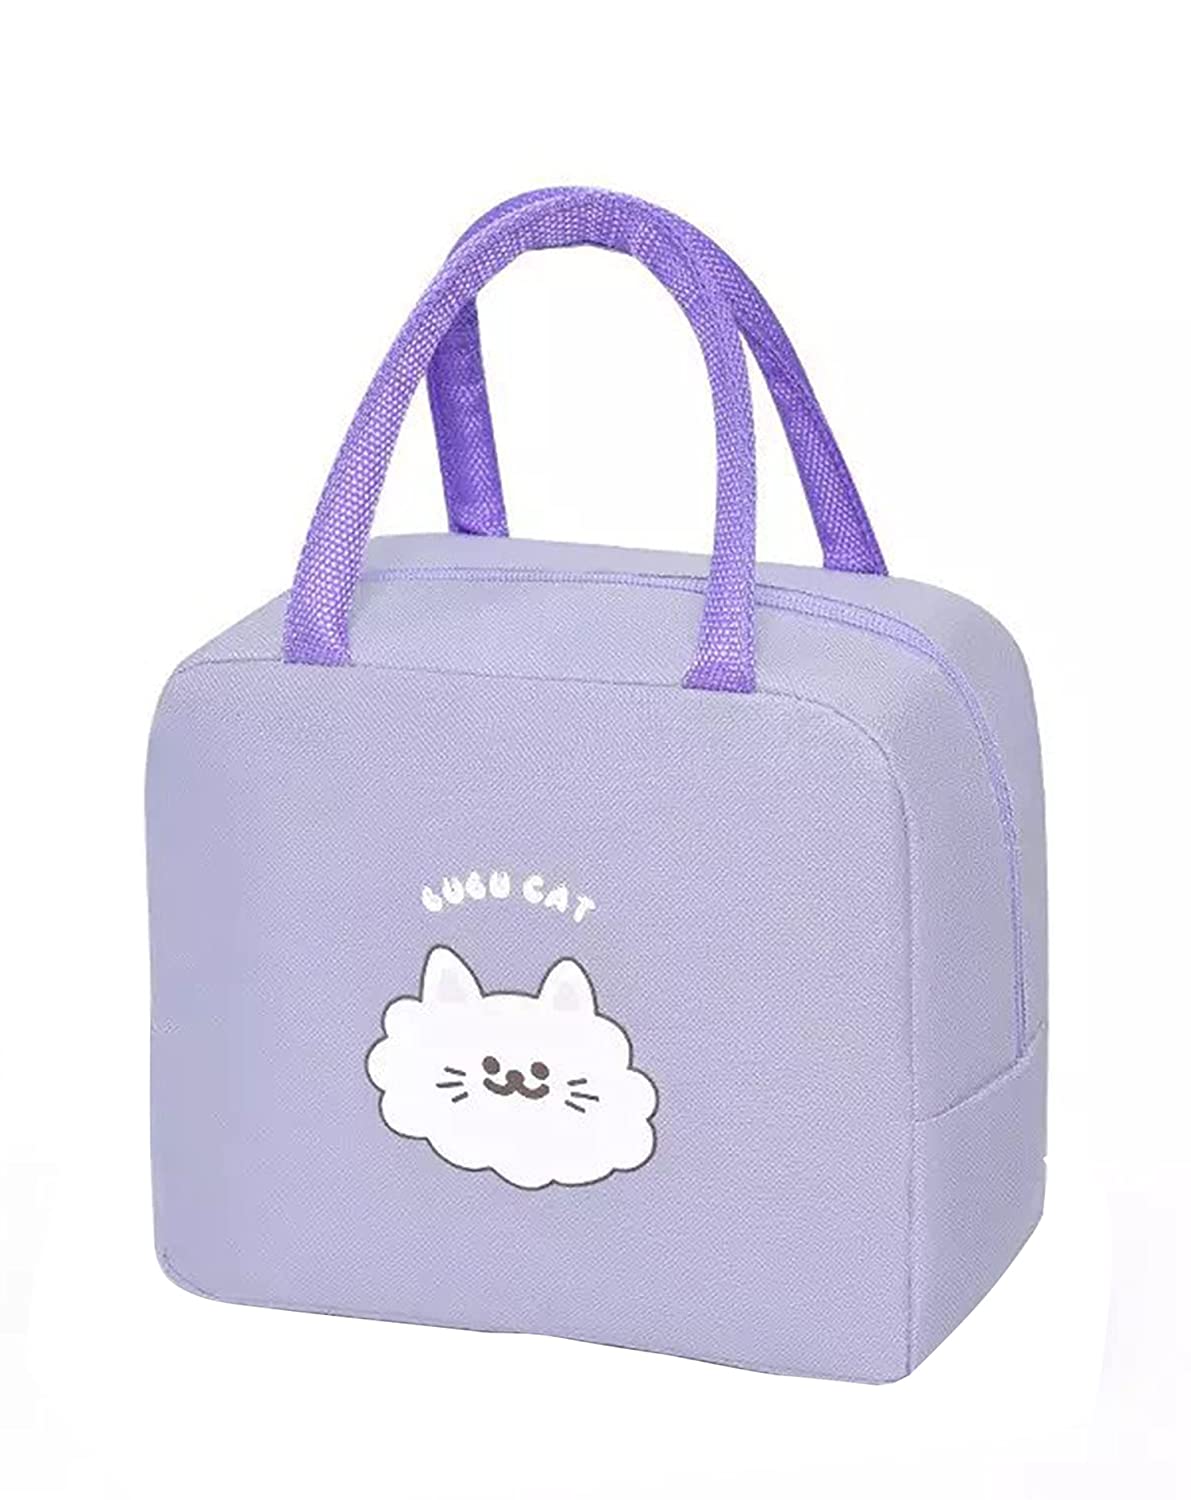 Cat Printed Insulated Reusable Lunch Bag(Bubu Cat)